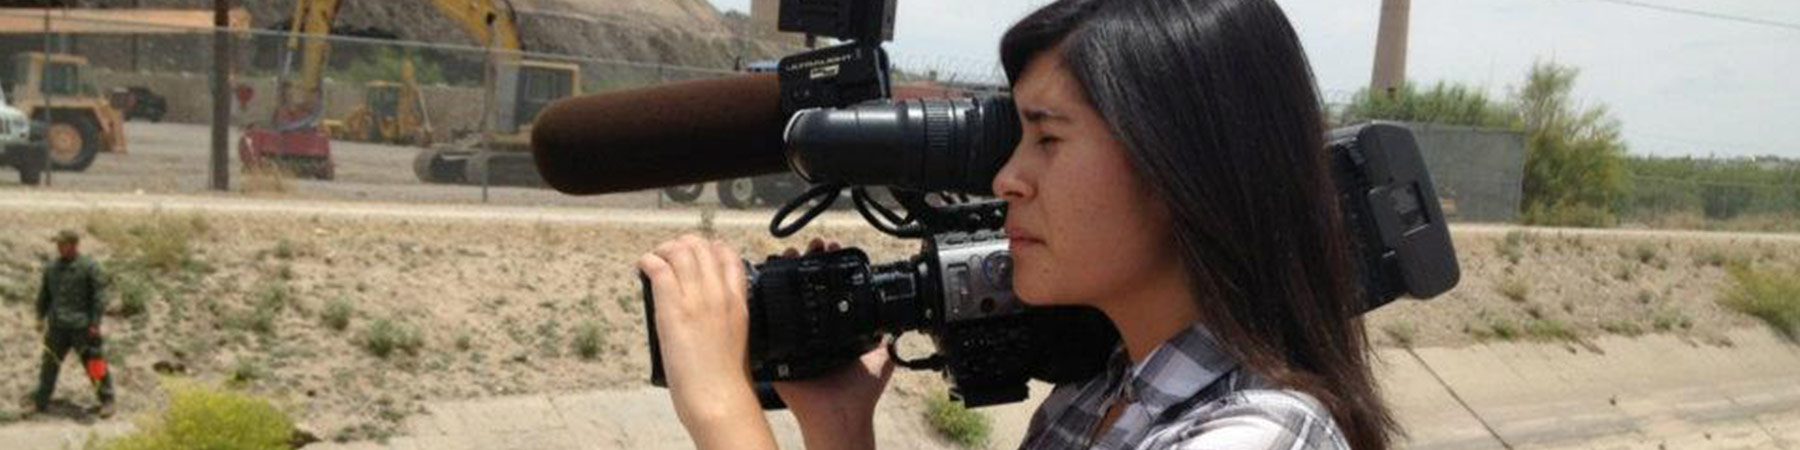 Photo of a camerawoman holding a video camera on her shoulder while looking through the lens